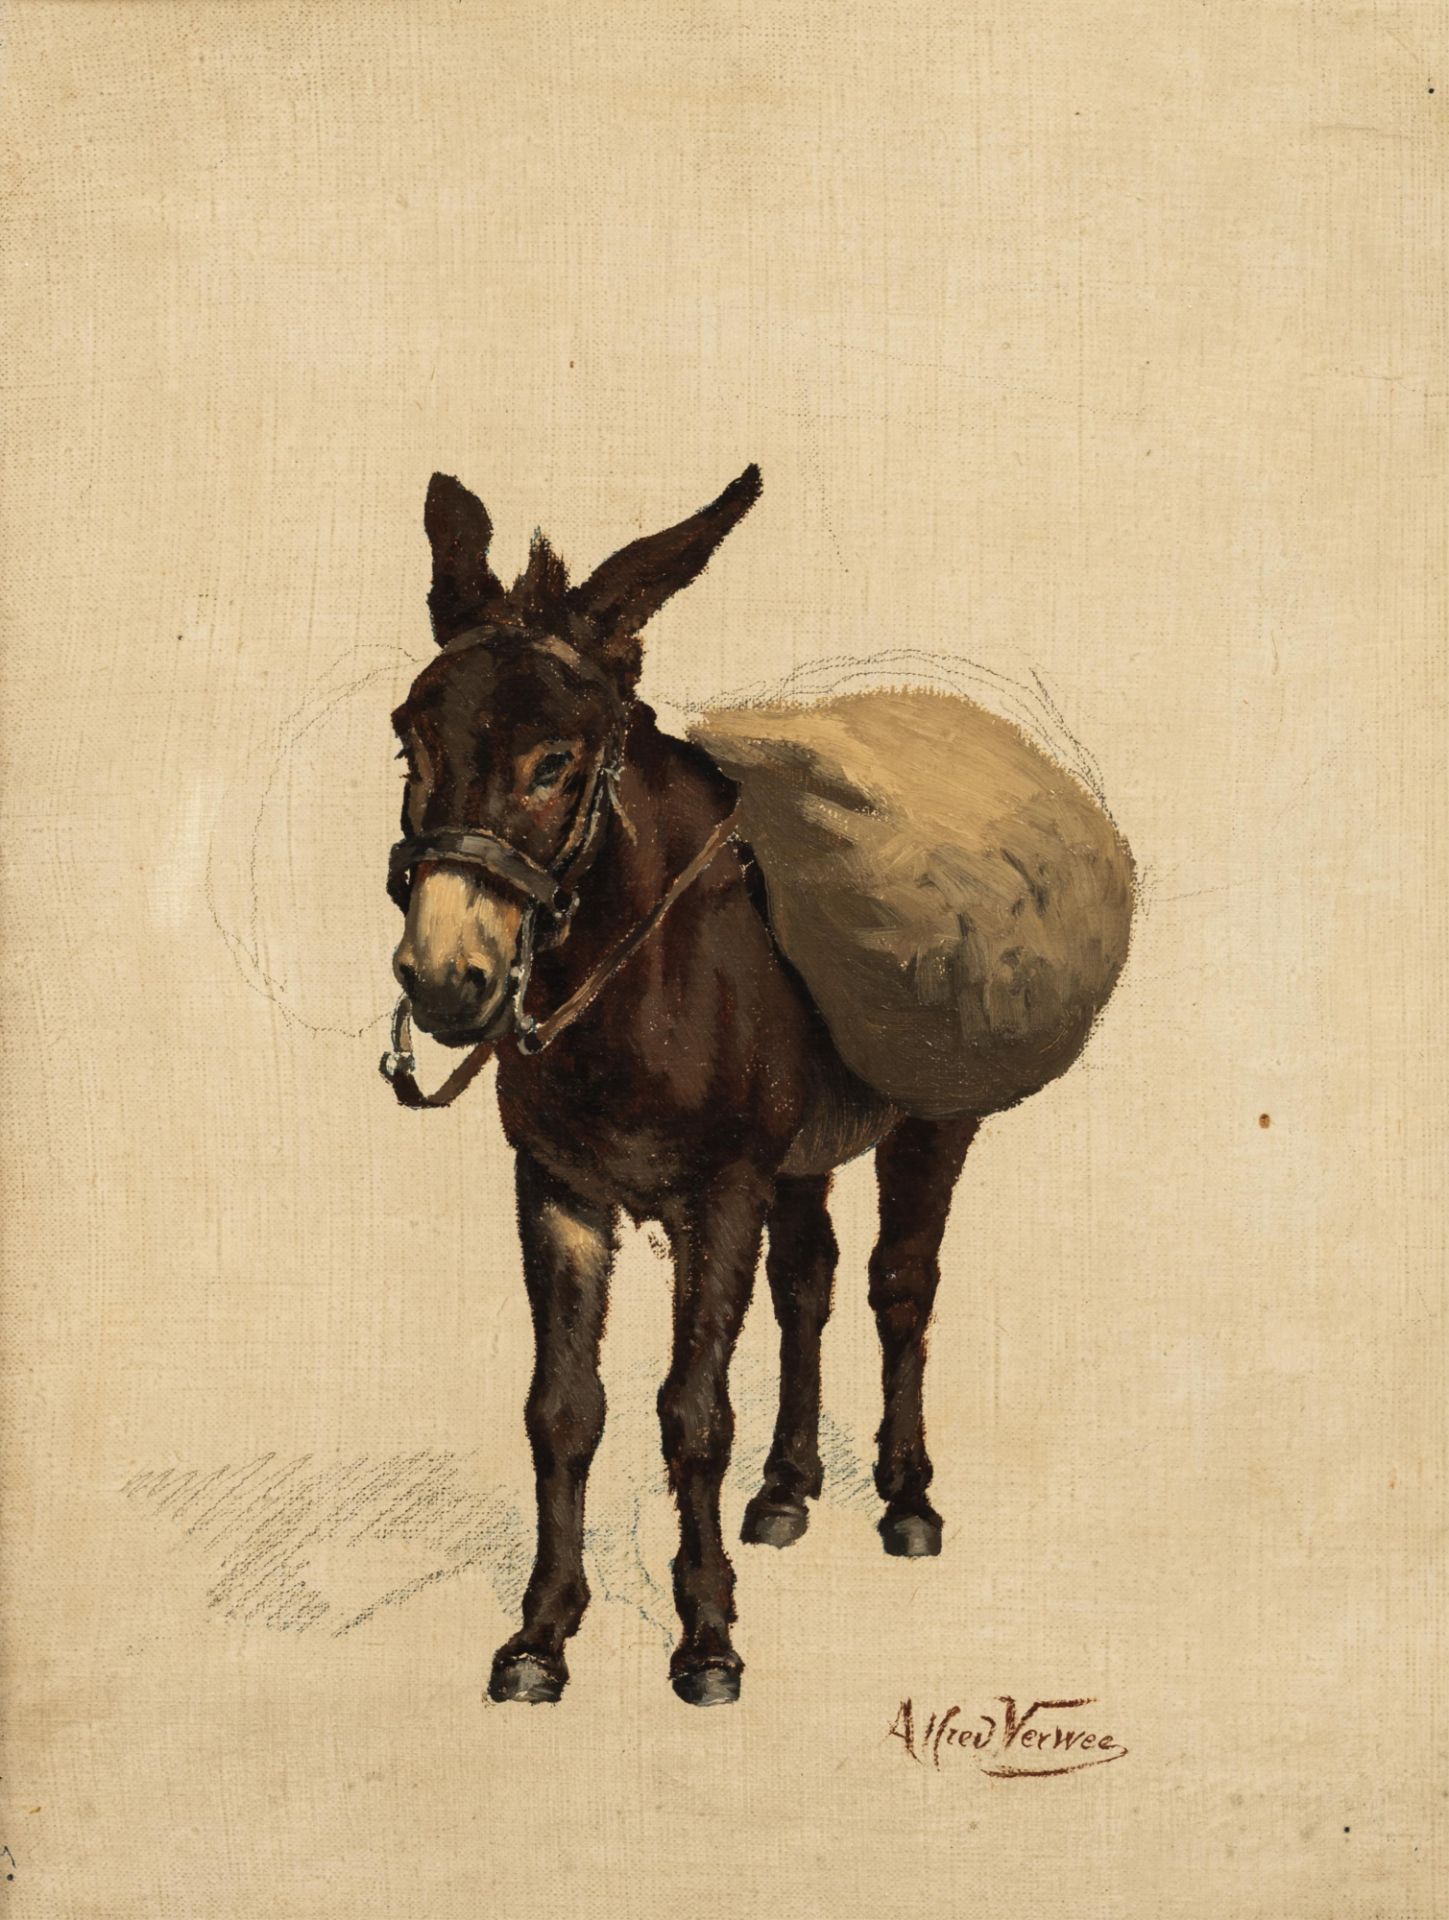 Verwee A., the packed donkey, an oil and pencil sketch on canvas, 27,5 x 35,5 cm